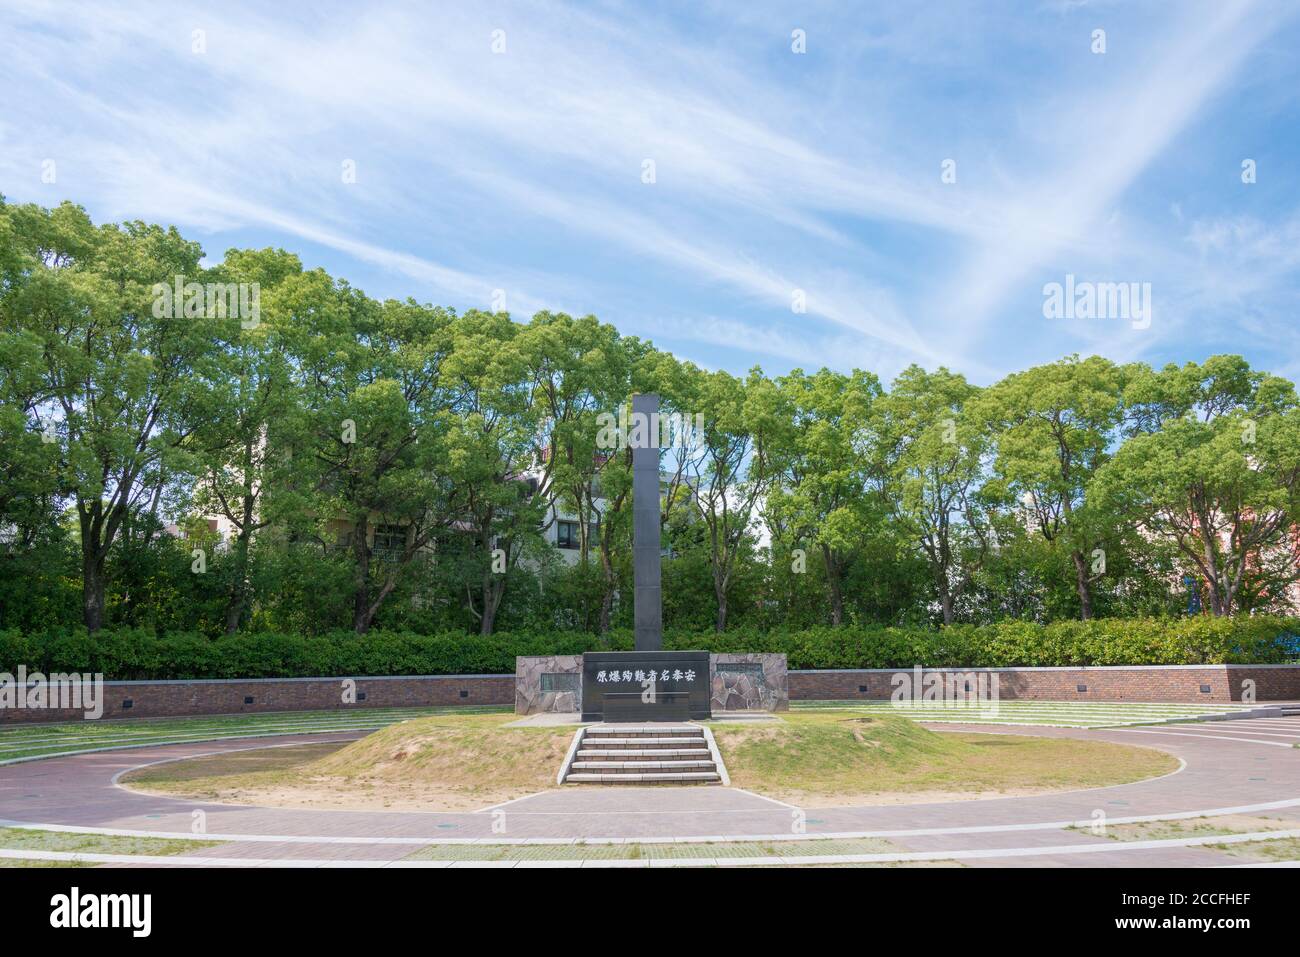 Hypocenter Cenotaph Of The Atomic Bomb Explosion In Nagasaki Japan At 11 02 Am On August 9 1945 An Atomic Bomb Exploded 500 Meters Above This Spot Stock Photo Alamy